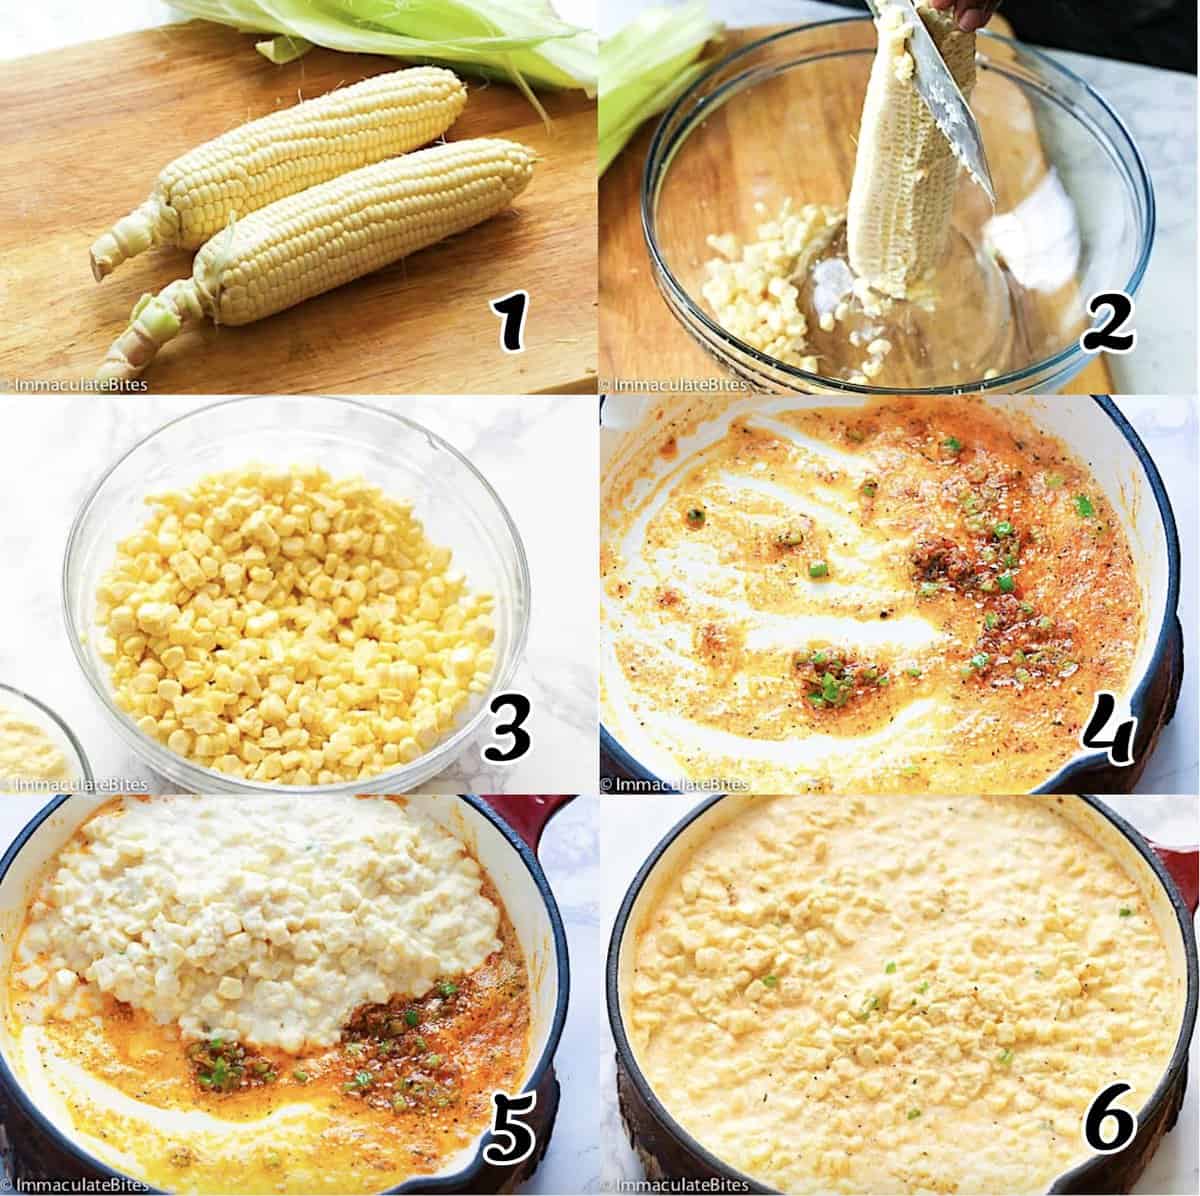 Remove corn from the cob, add seasonings, and put it all together